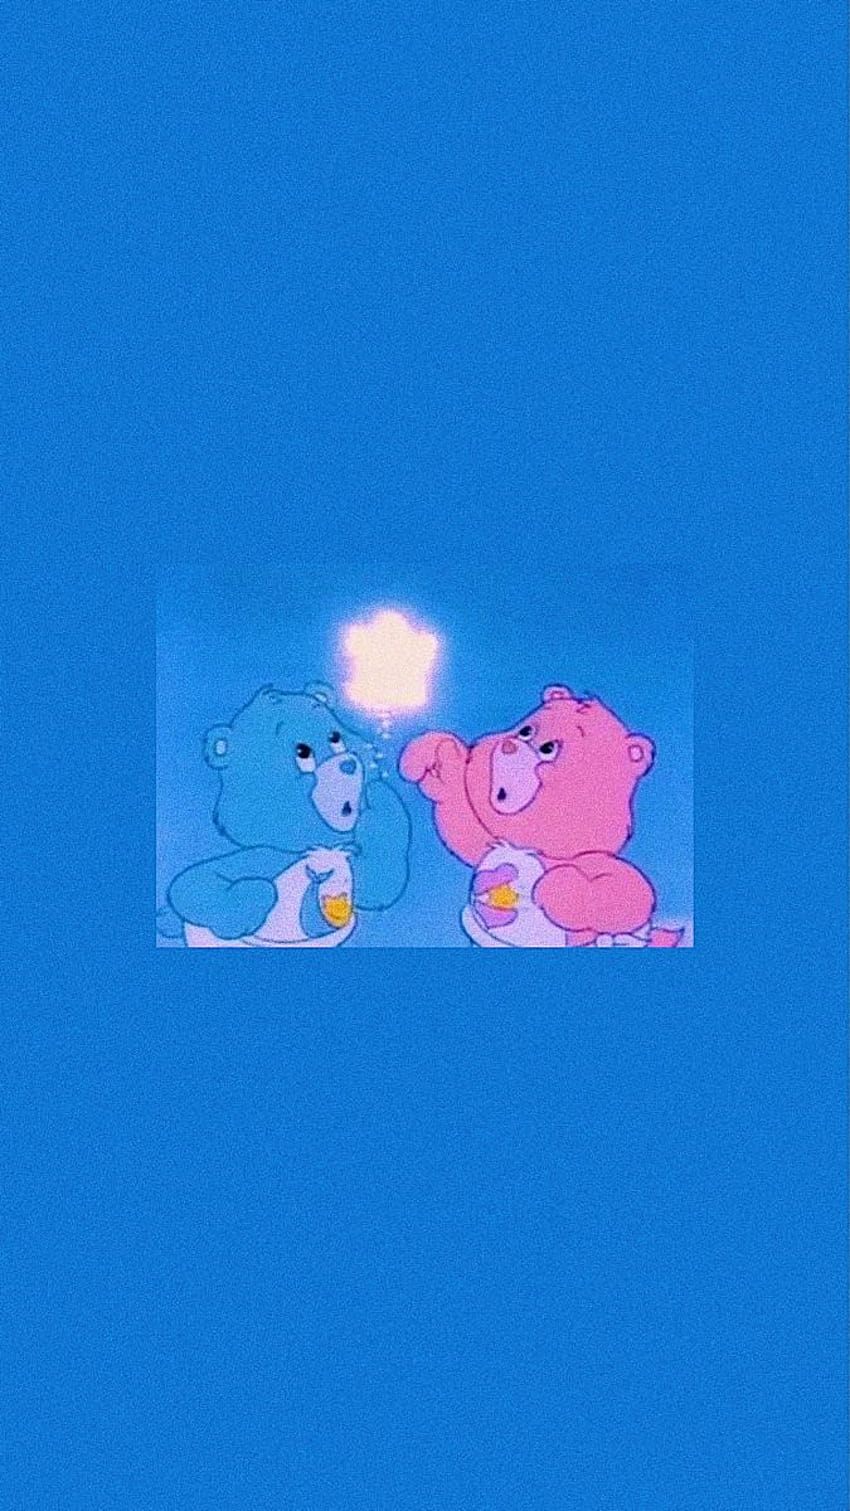 1920x1080px, 1080P Free download | blue baddie aesthetic care bears ...